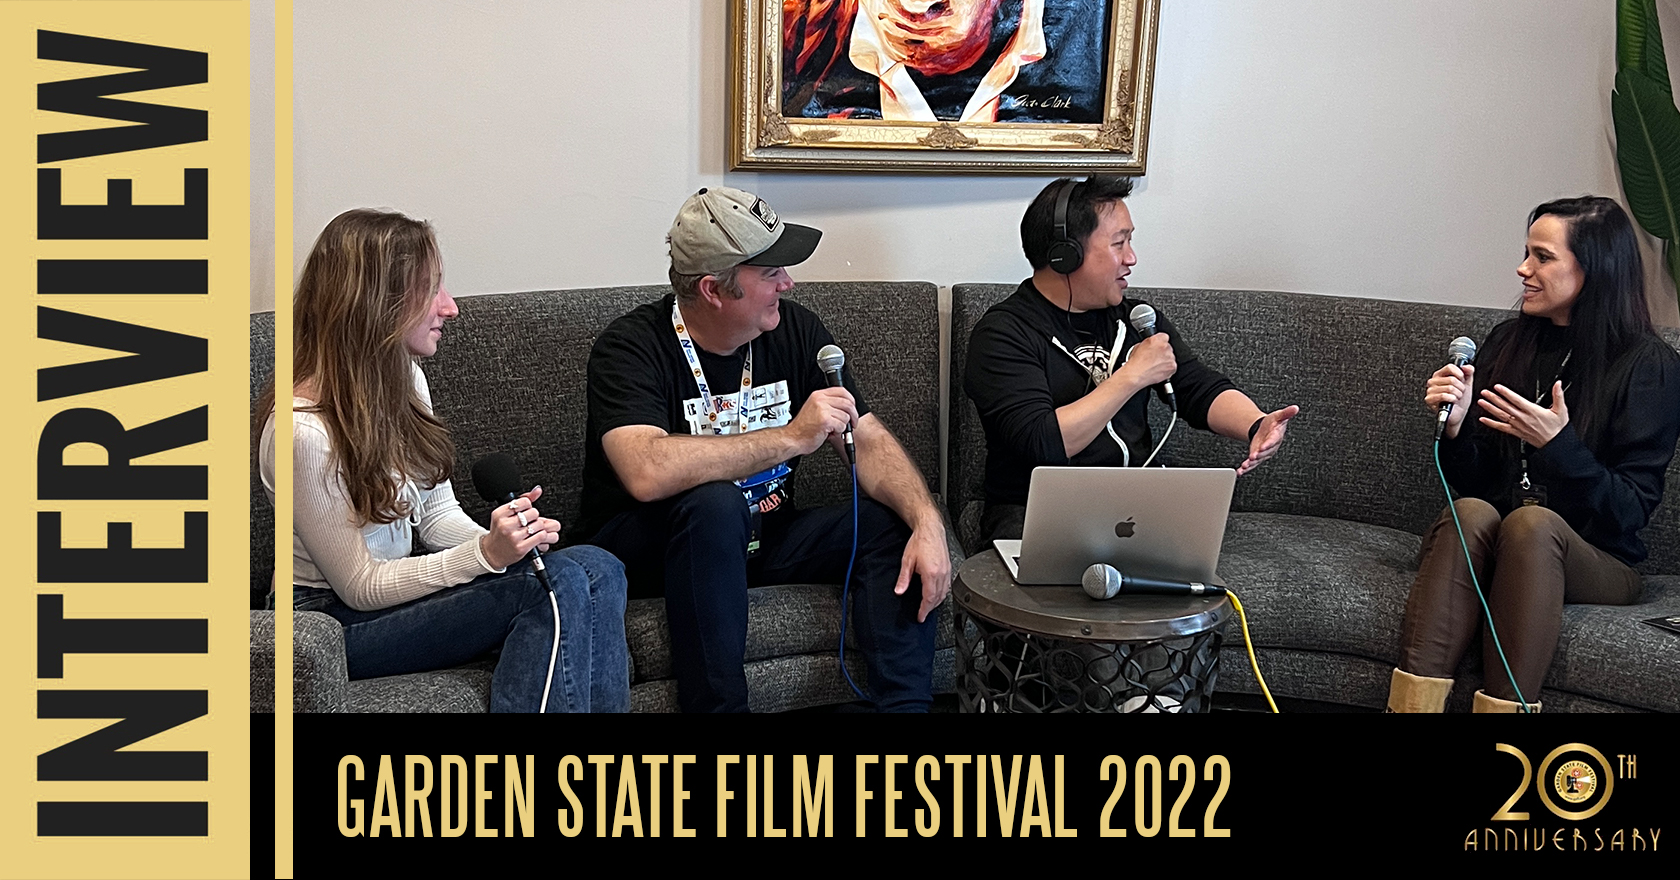 LIVE Director’s Interview with Ming Chen at Garden State Film Festival 2022